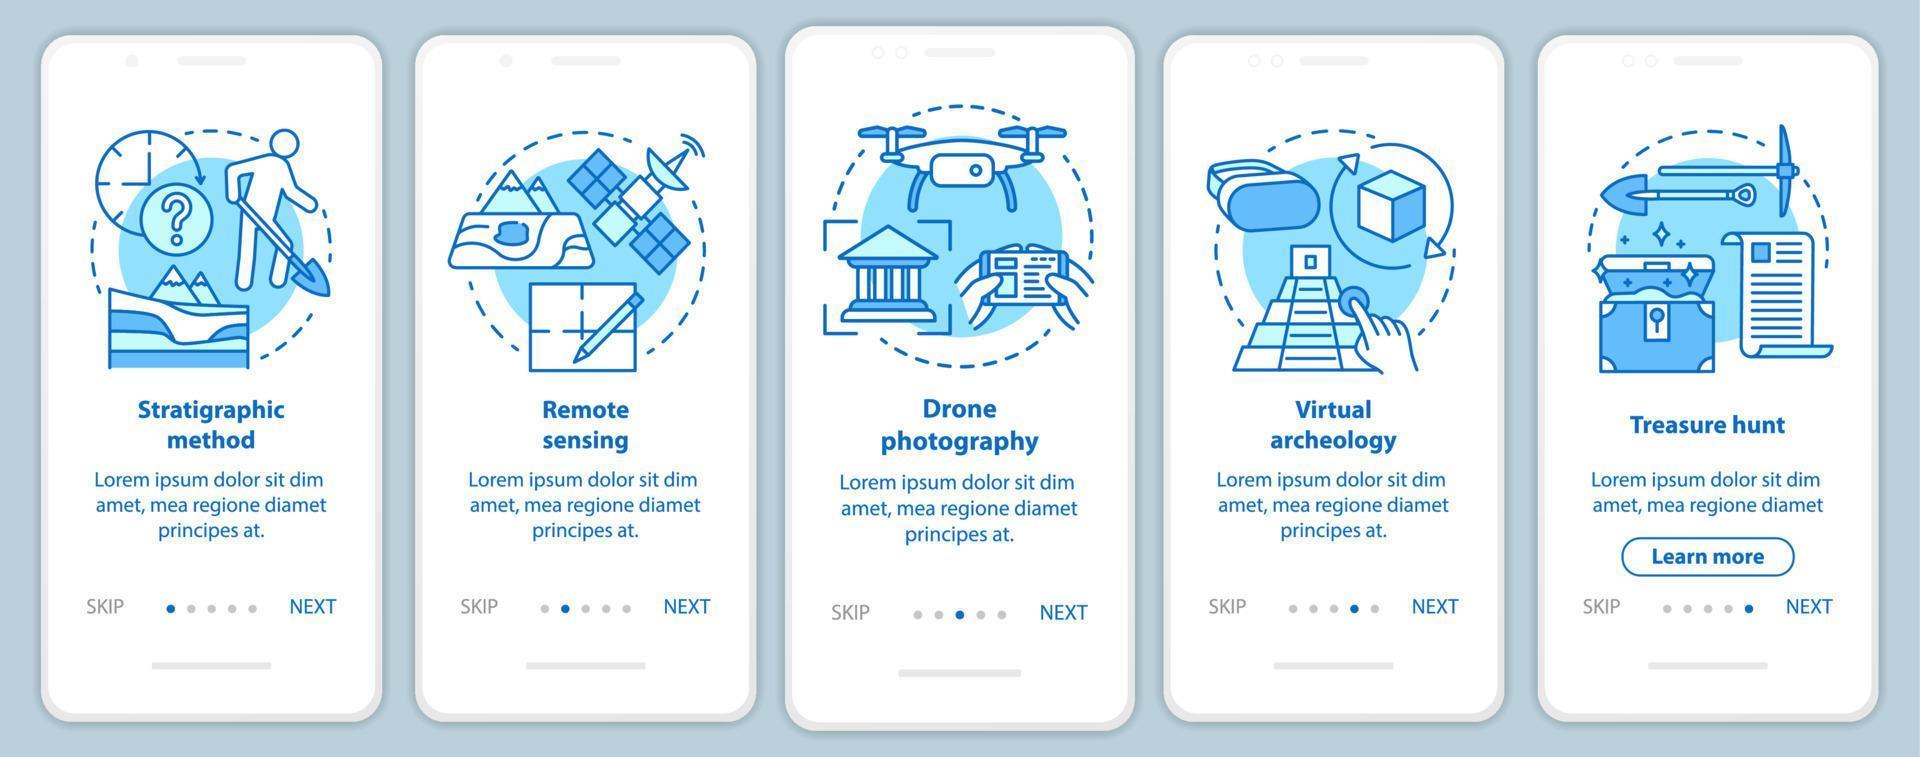 Archeology methods onboarding mobile app page screen vector template